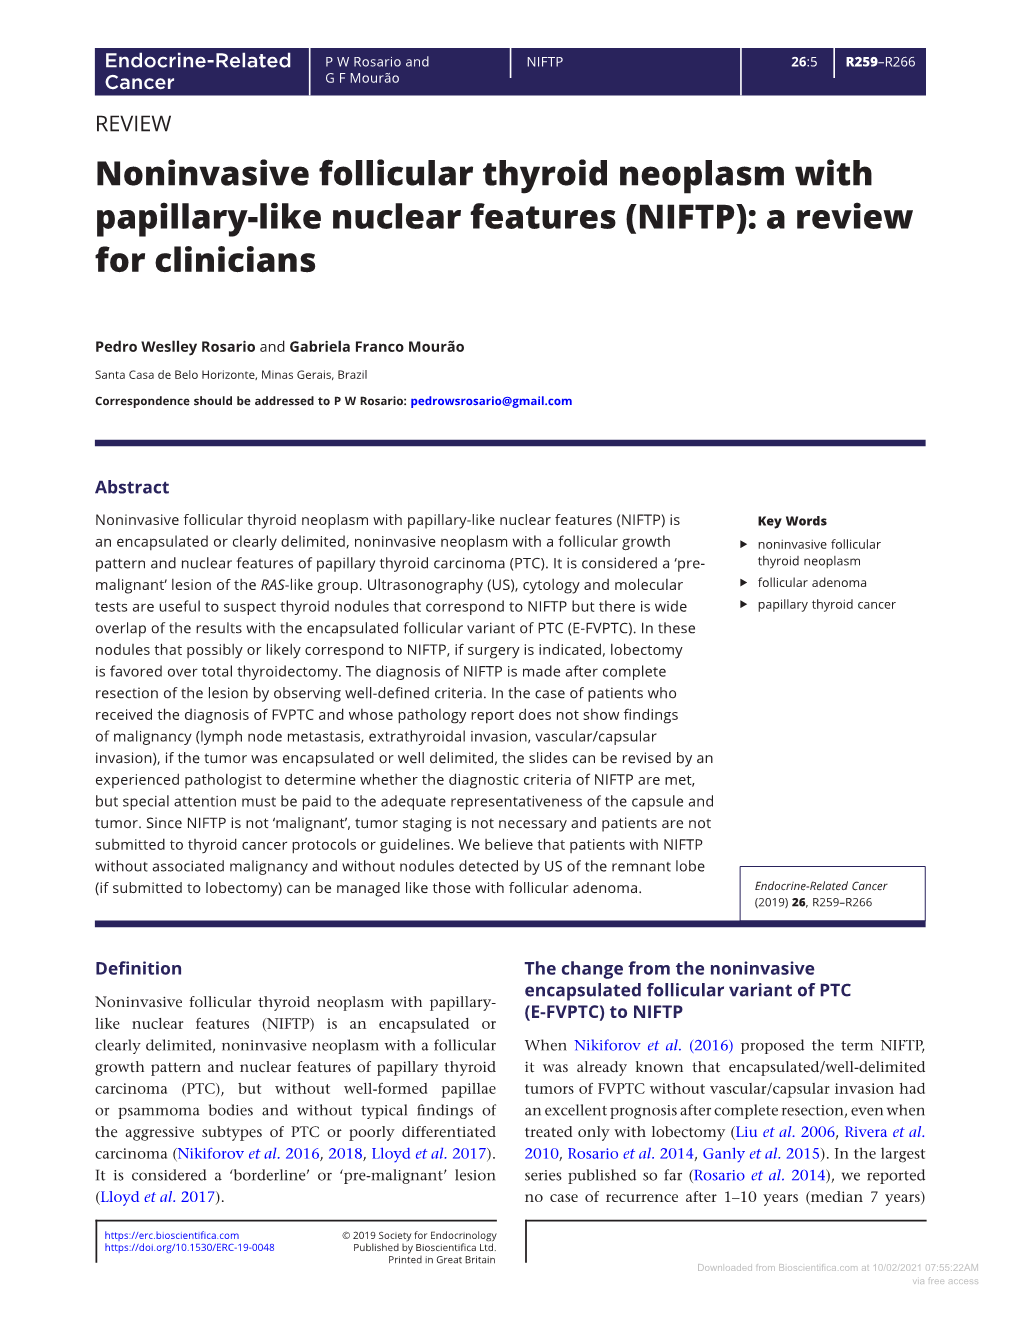 Noninvasive Follicular Thyroid Neoplasm with Papillary-Like Nuclear Features (NIFTP): a Review for Clinicians